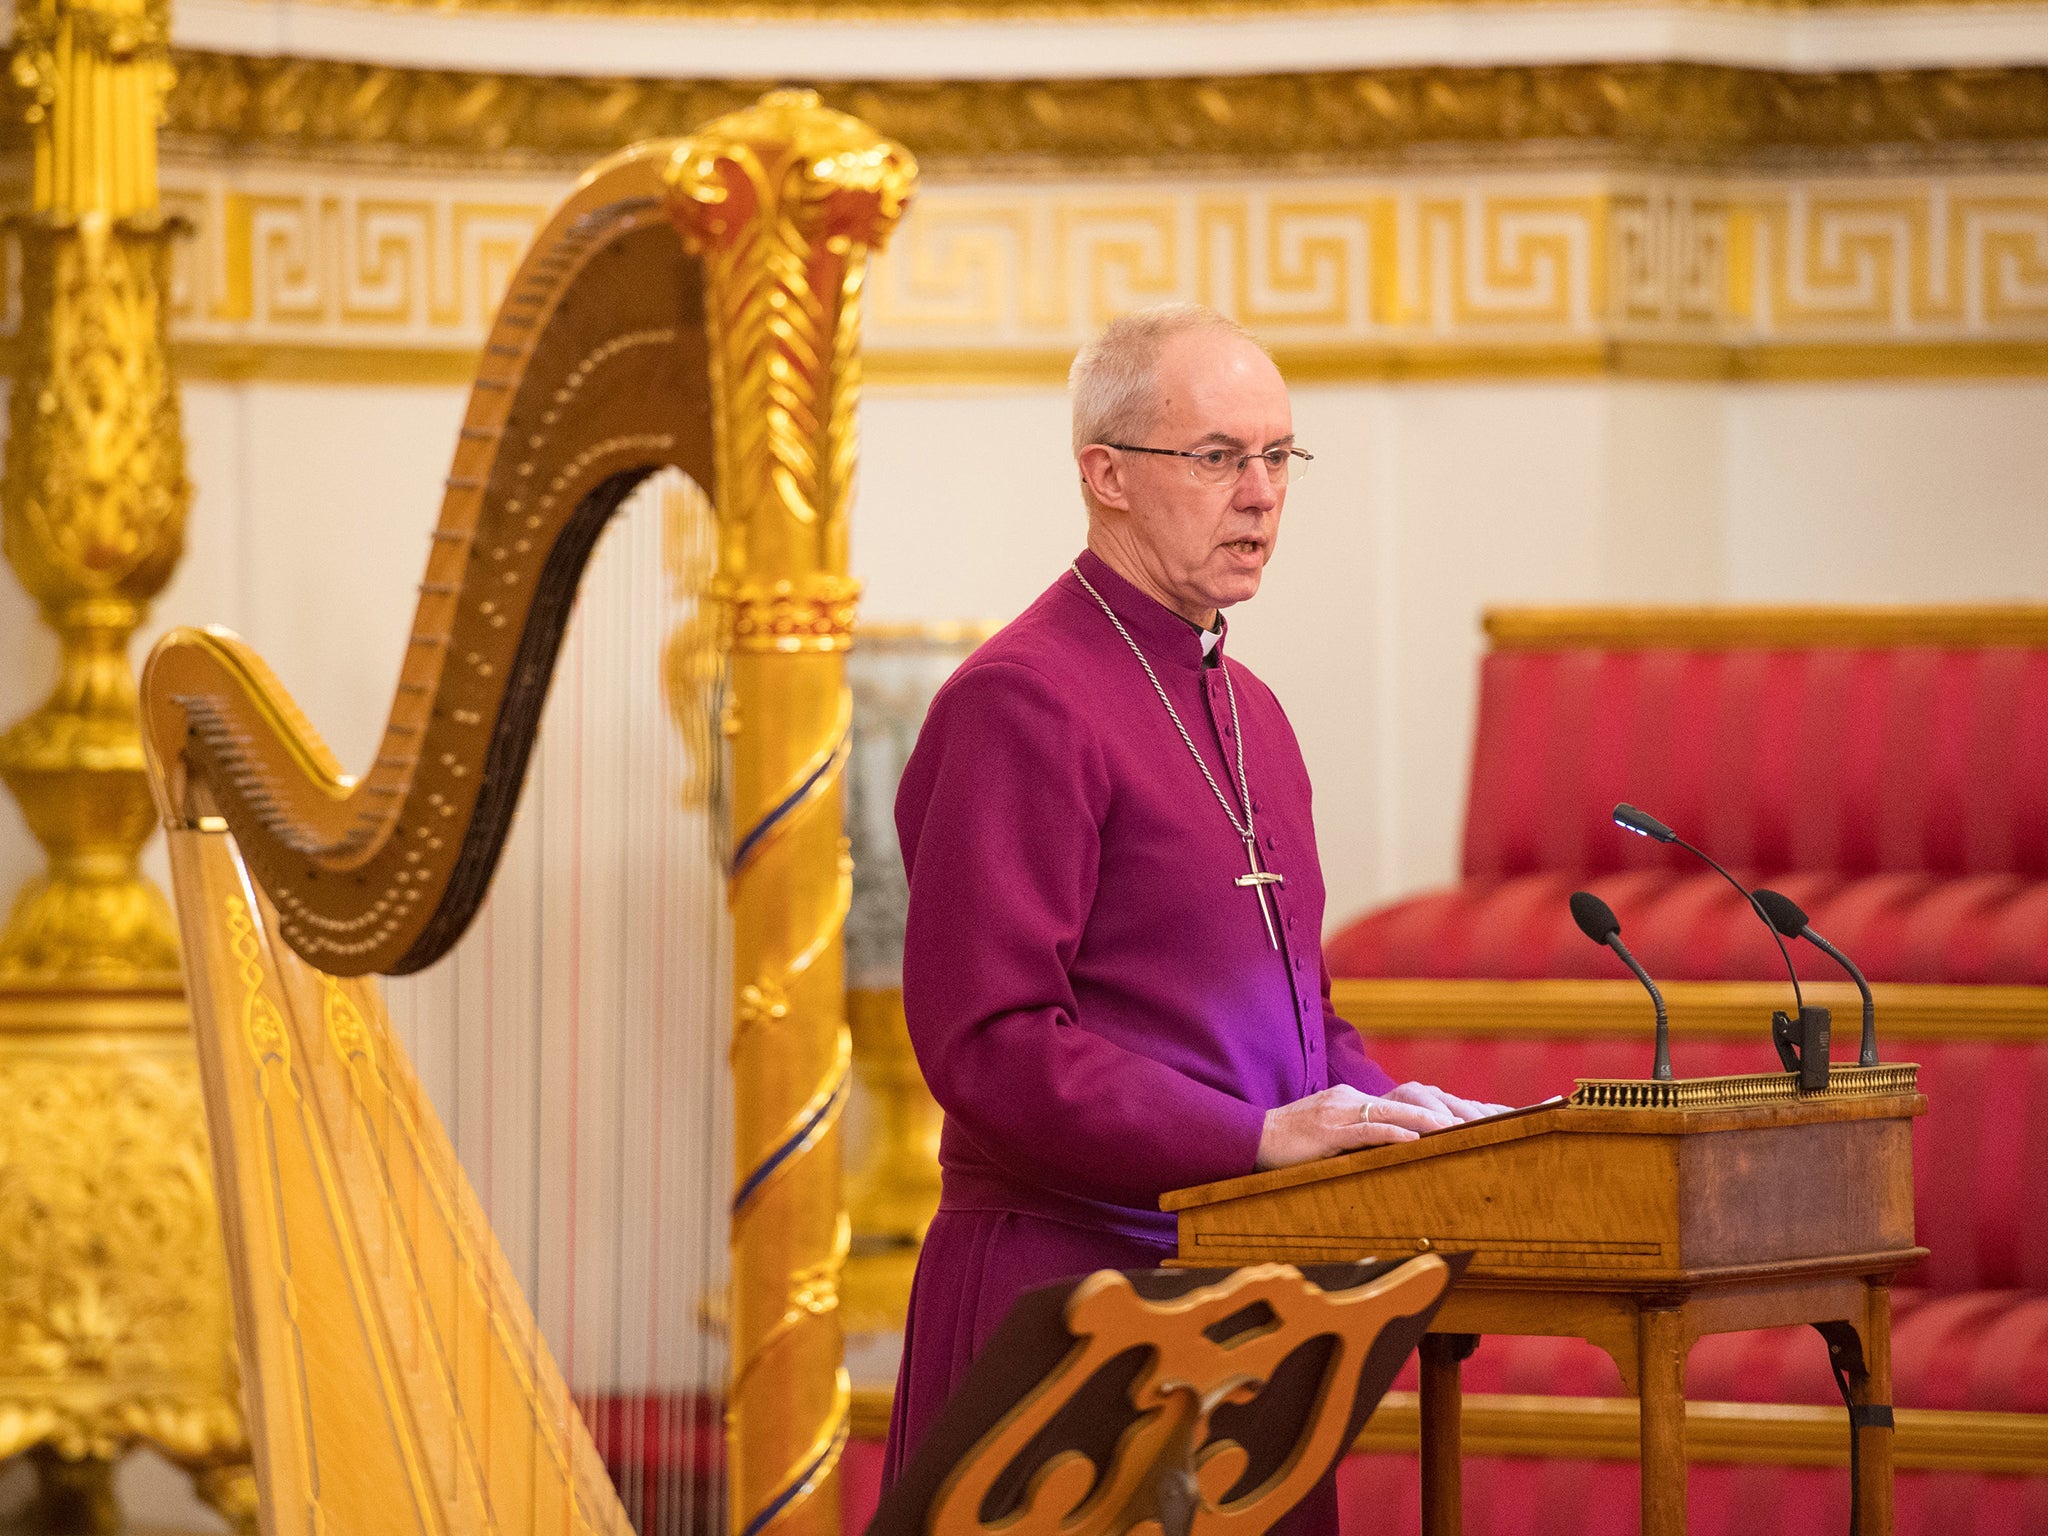 The Most Revd and Rt Hon Justin Welby, the Archbishop of Canterbury